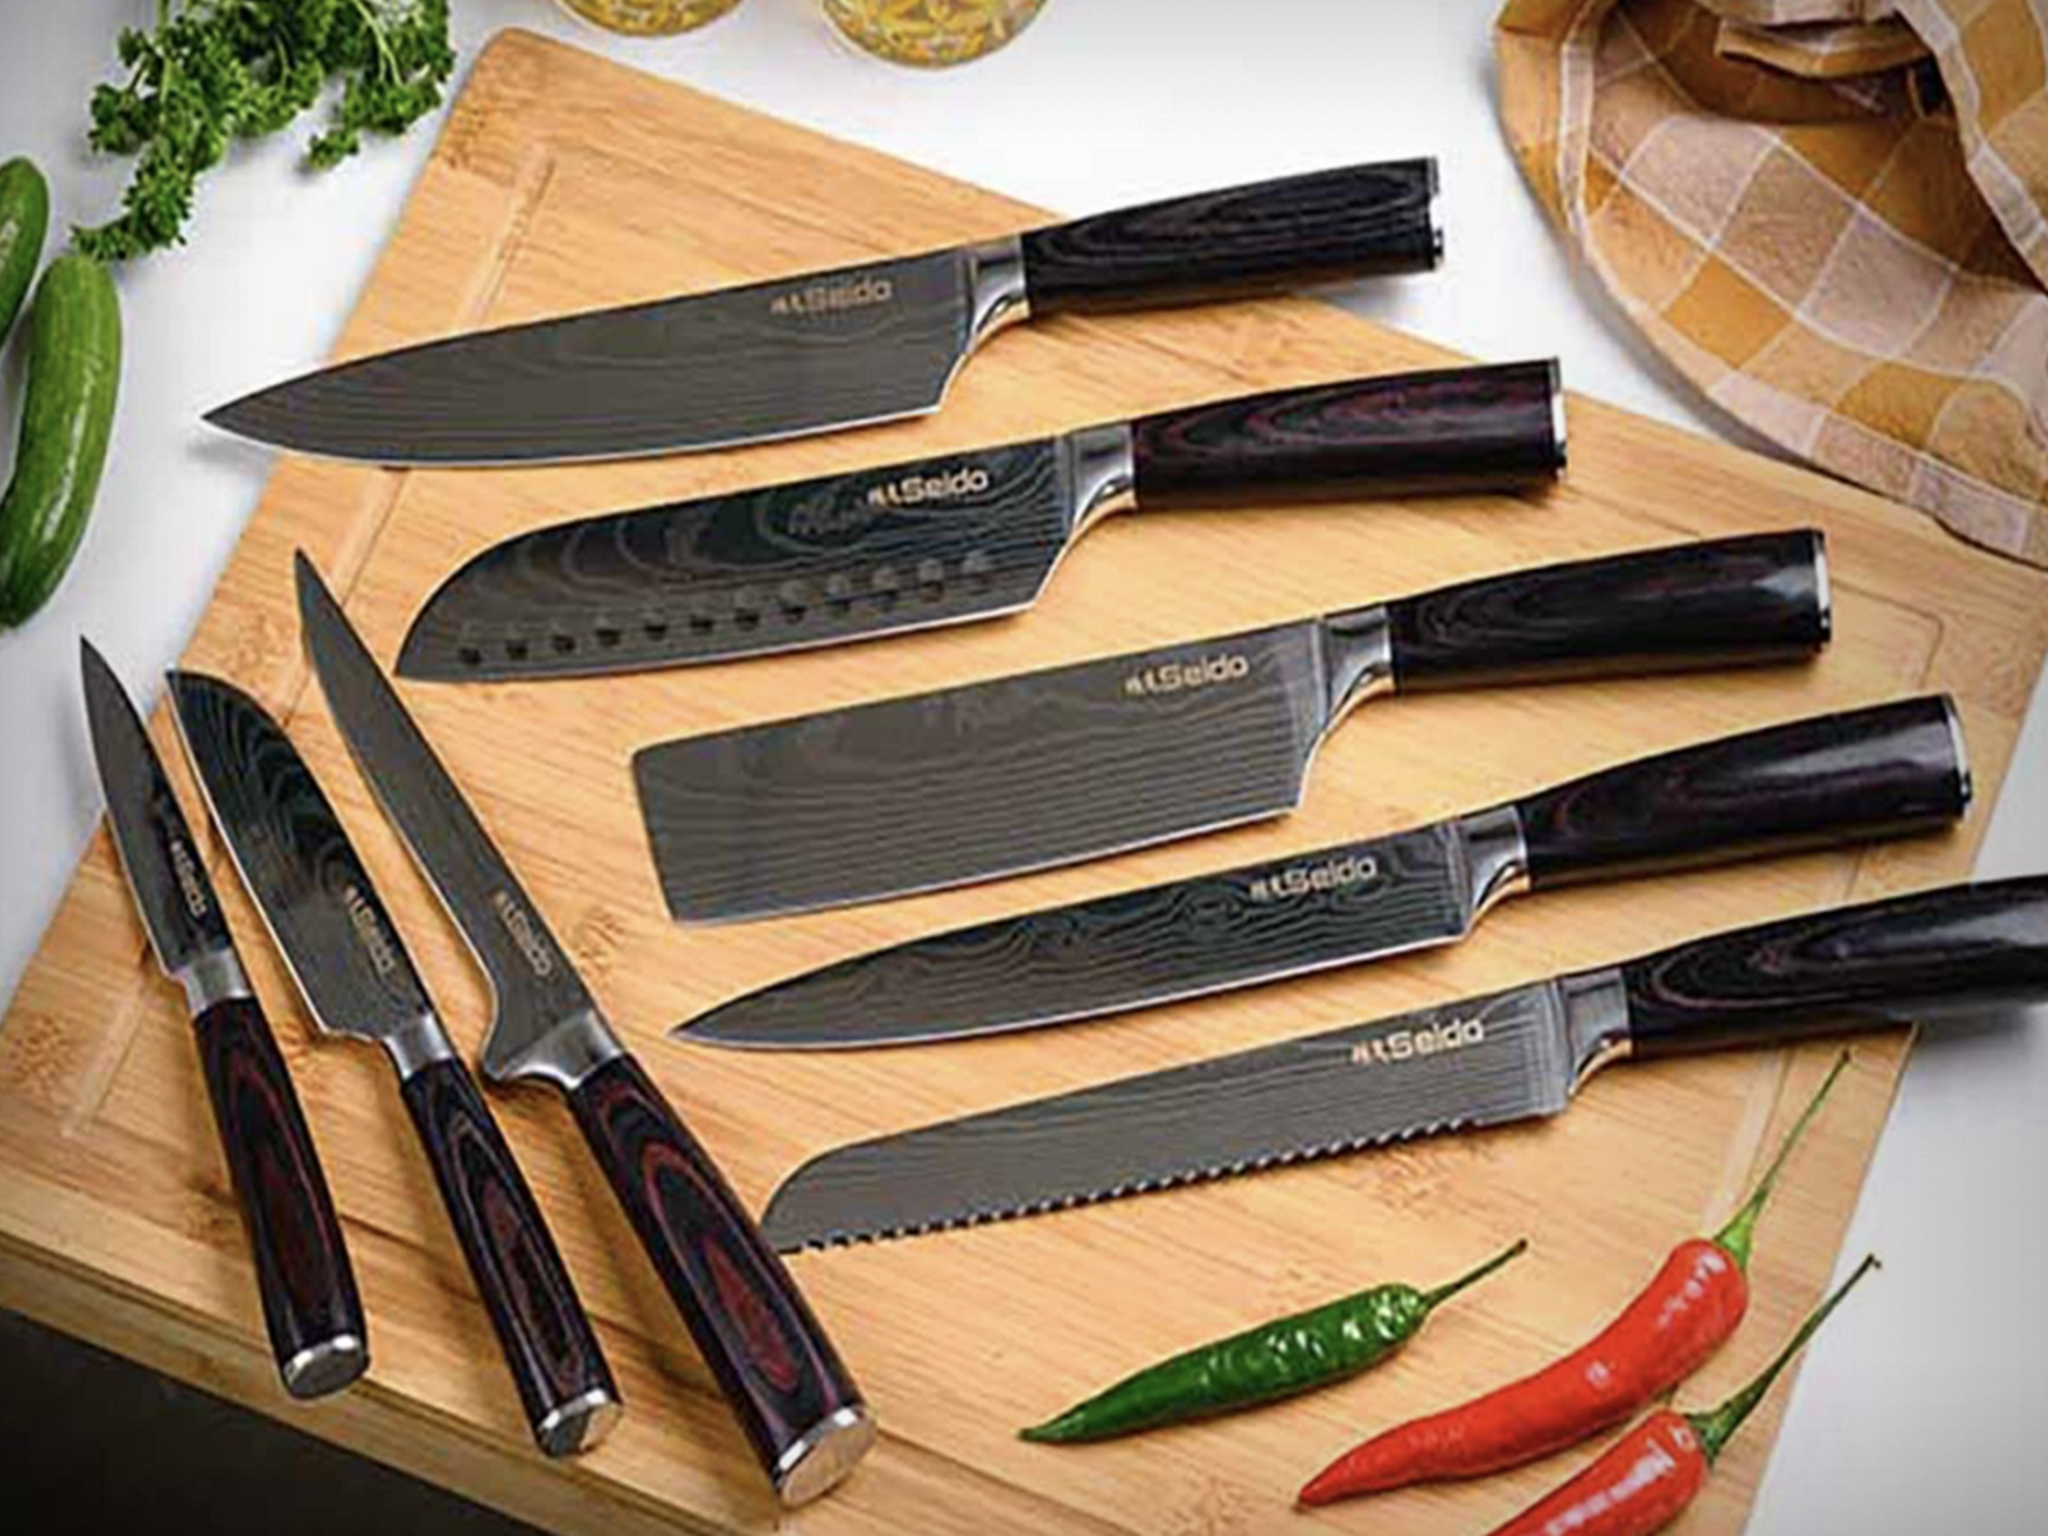 We slashed the price on this Japanese kitchen knife set to $90